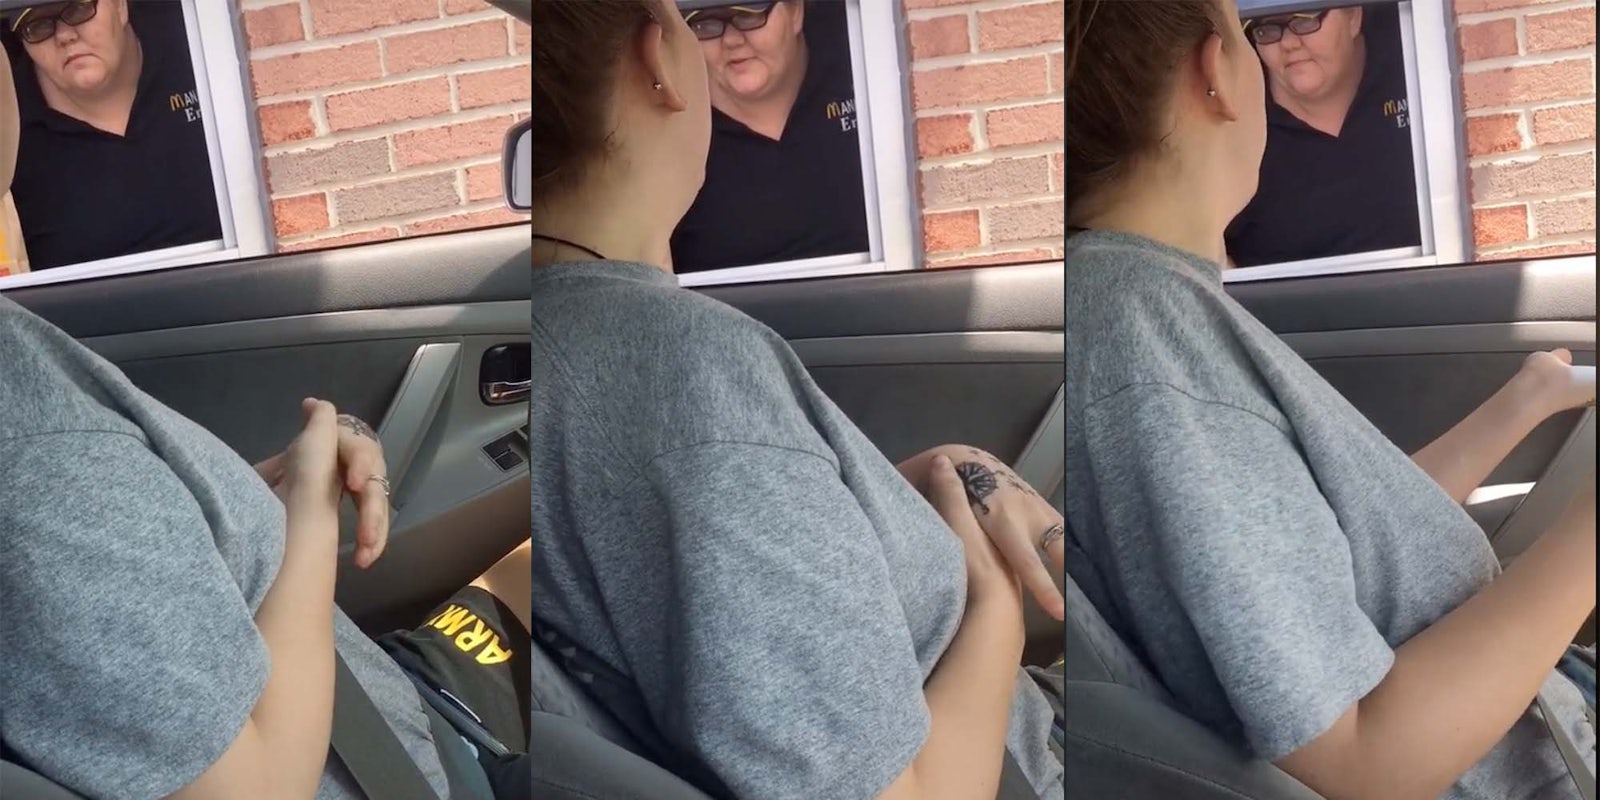 A woman confronts her friend's manager, who she says made her friend work while sick.